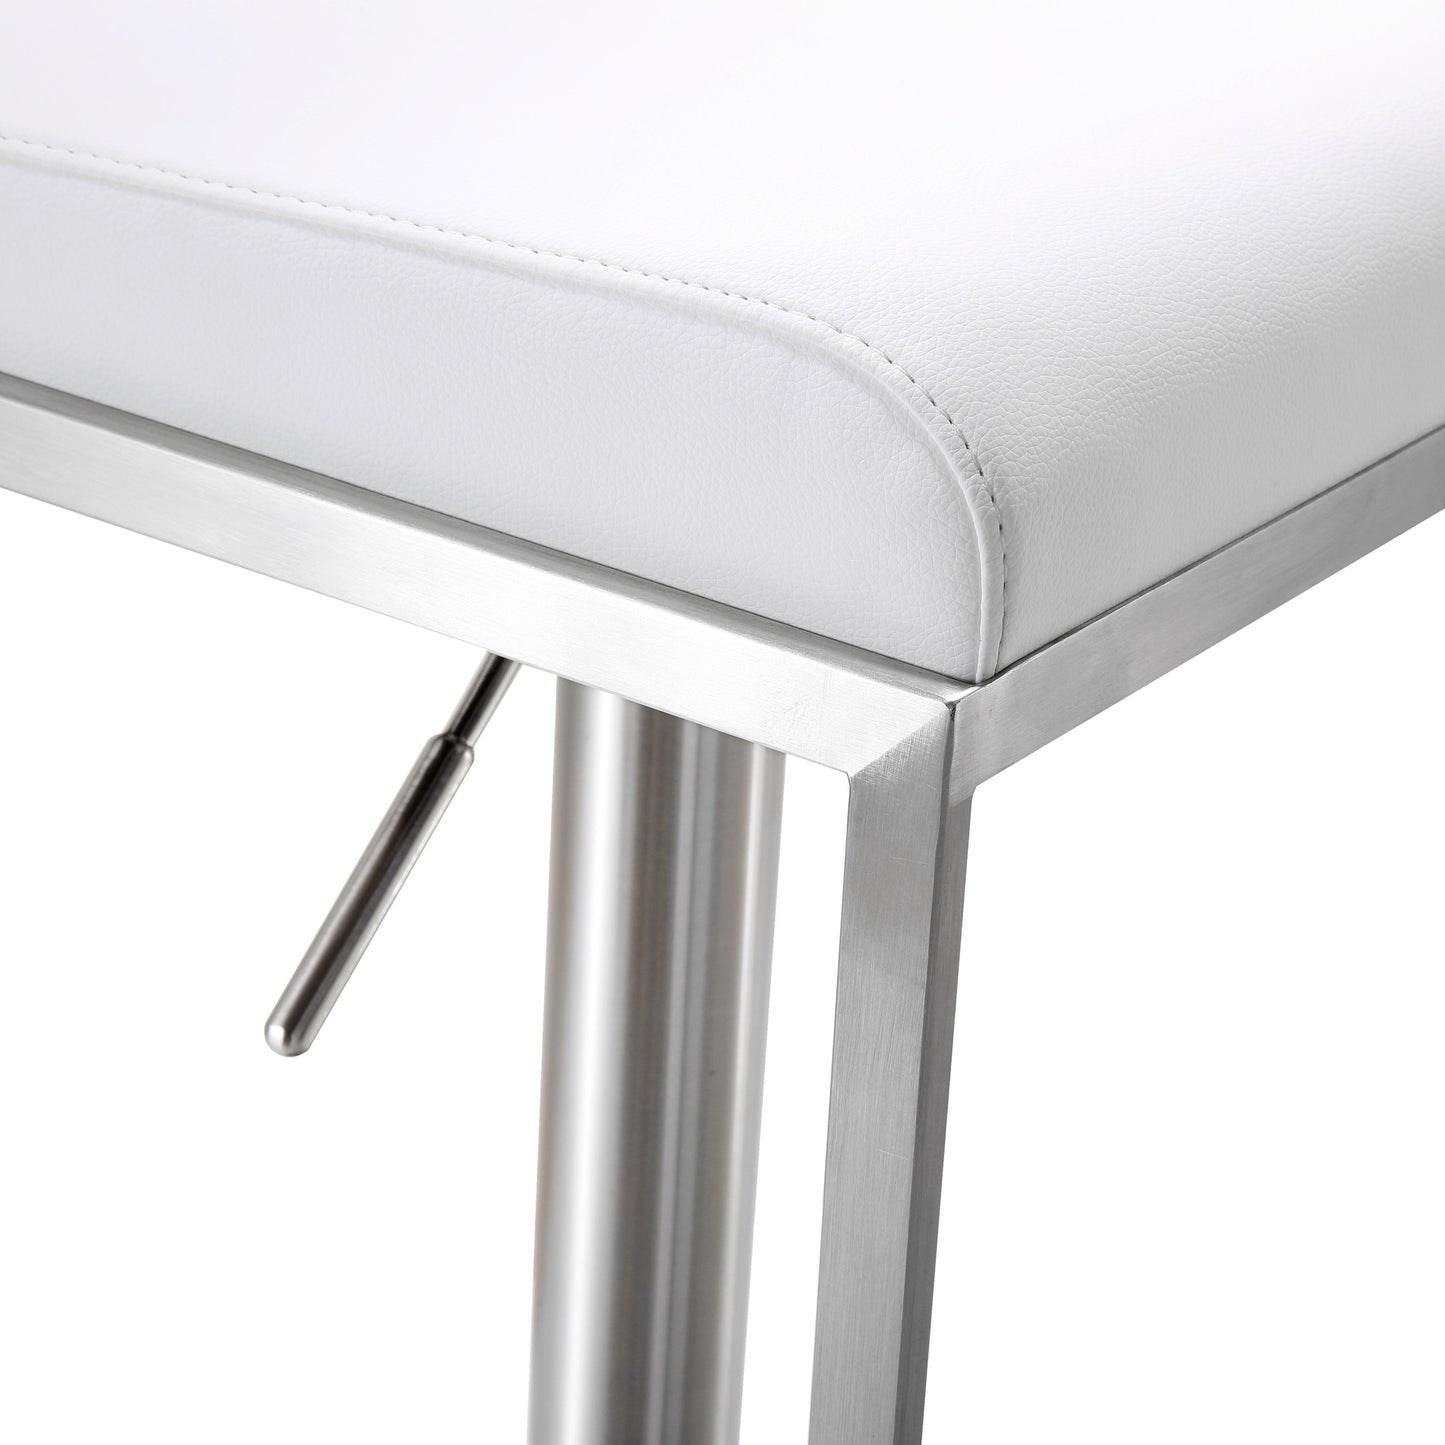 Amarie White Stainless Steel Barstool - living-essentials